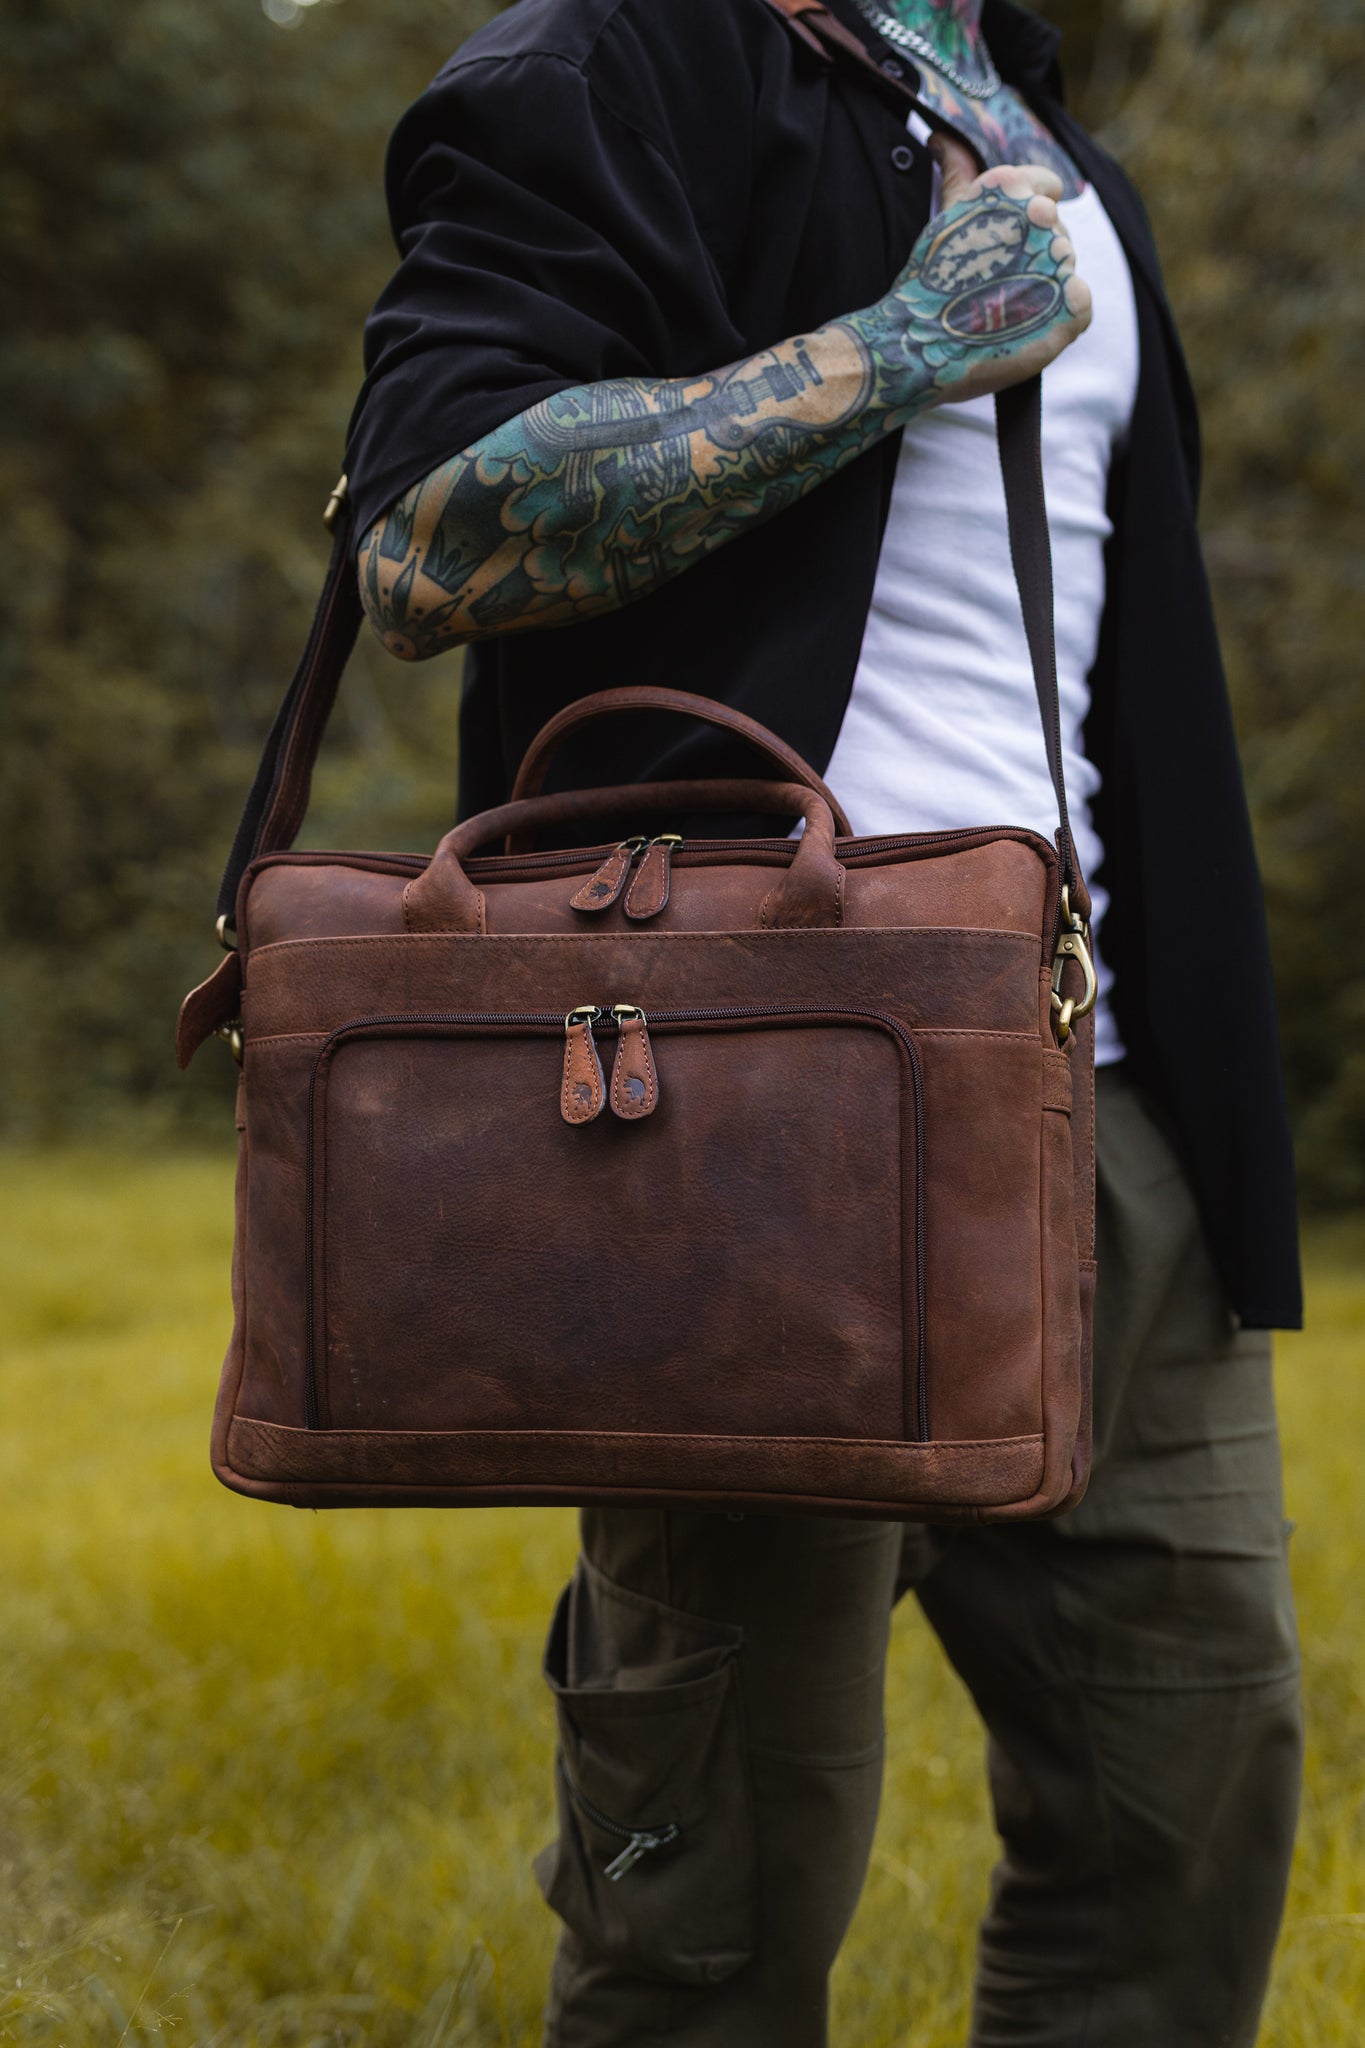 Essential Qualities of a Perfect 13 inches Laptop Bag or a Laptop Case